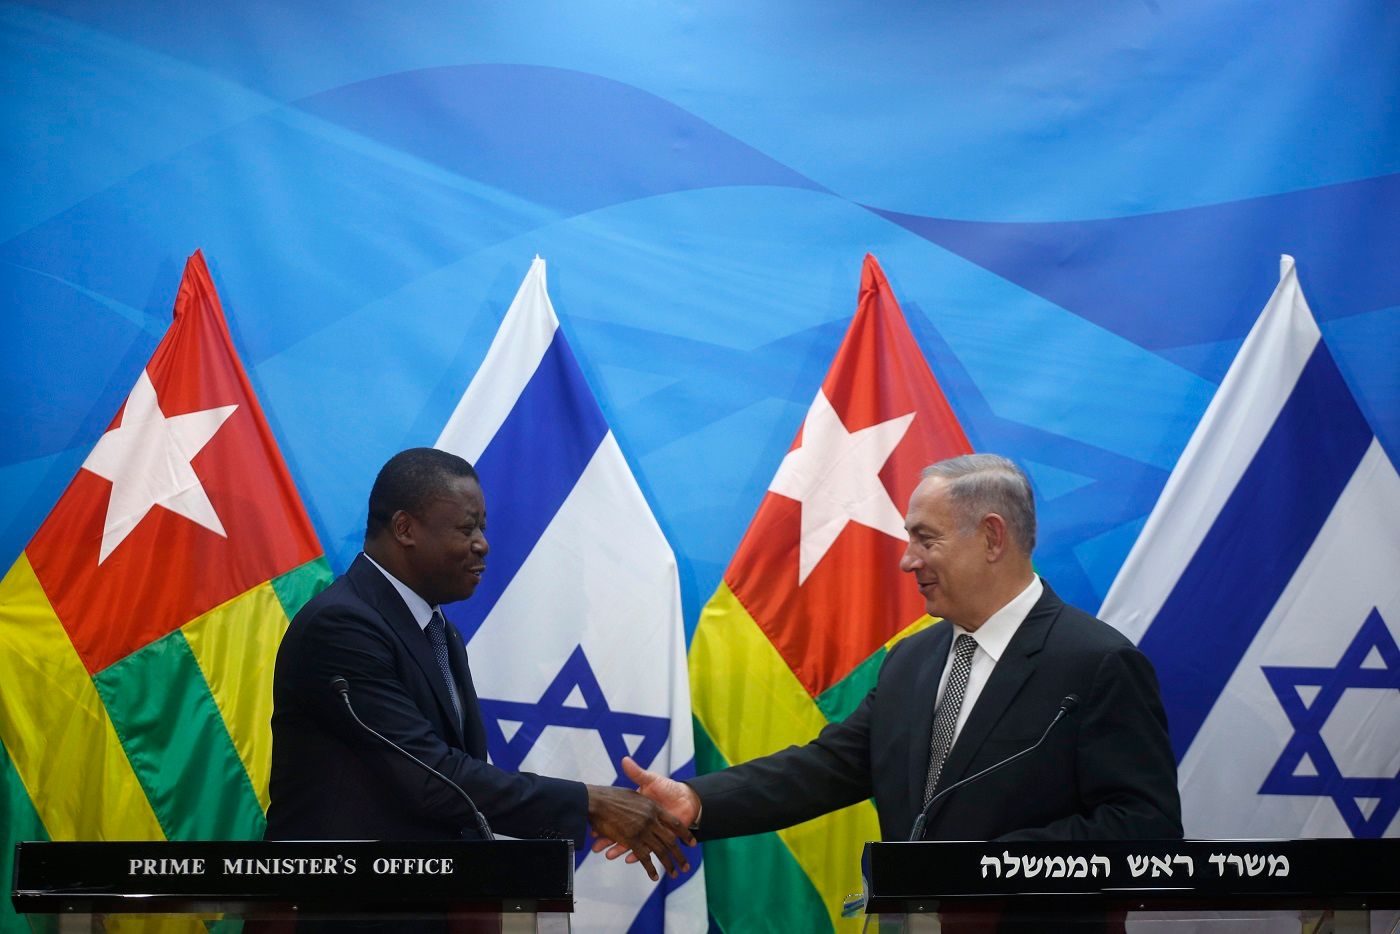 Arab Countries' Boycott Threat Leads to Cancellation of First Israel-Africa Summit